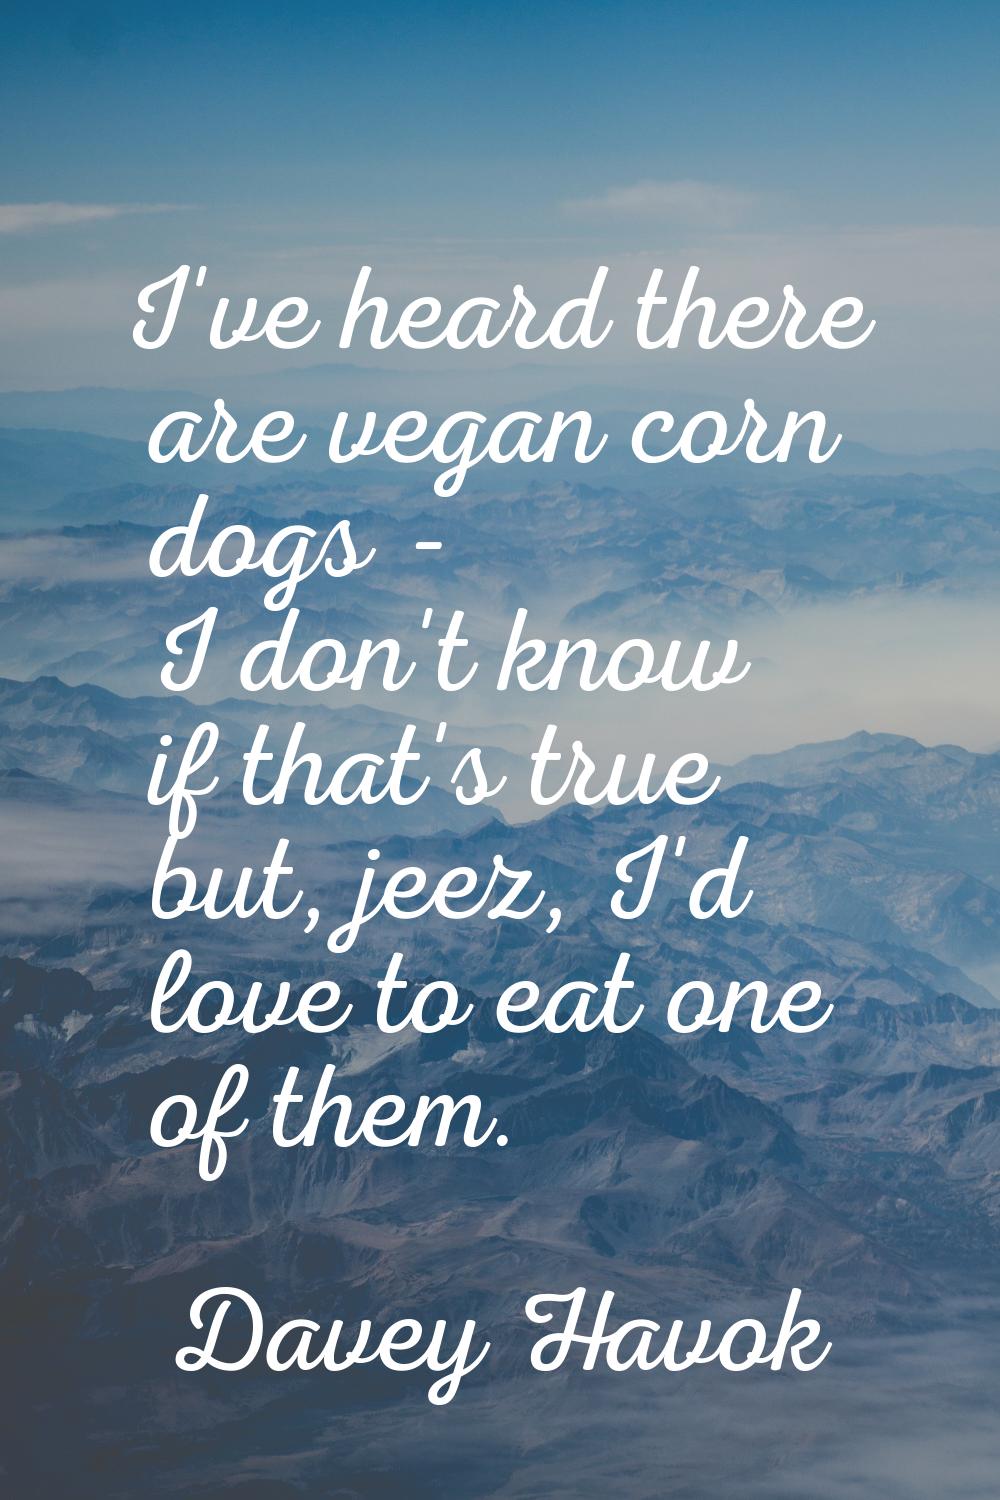 I've heard there are vegan corn dogs - I don't know if that's true but, jeez, I'd love to eat one o